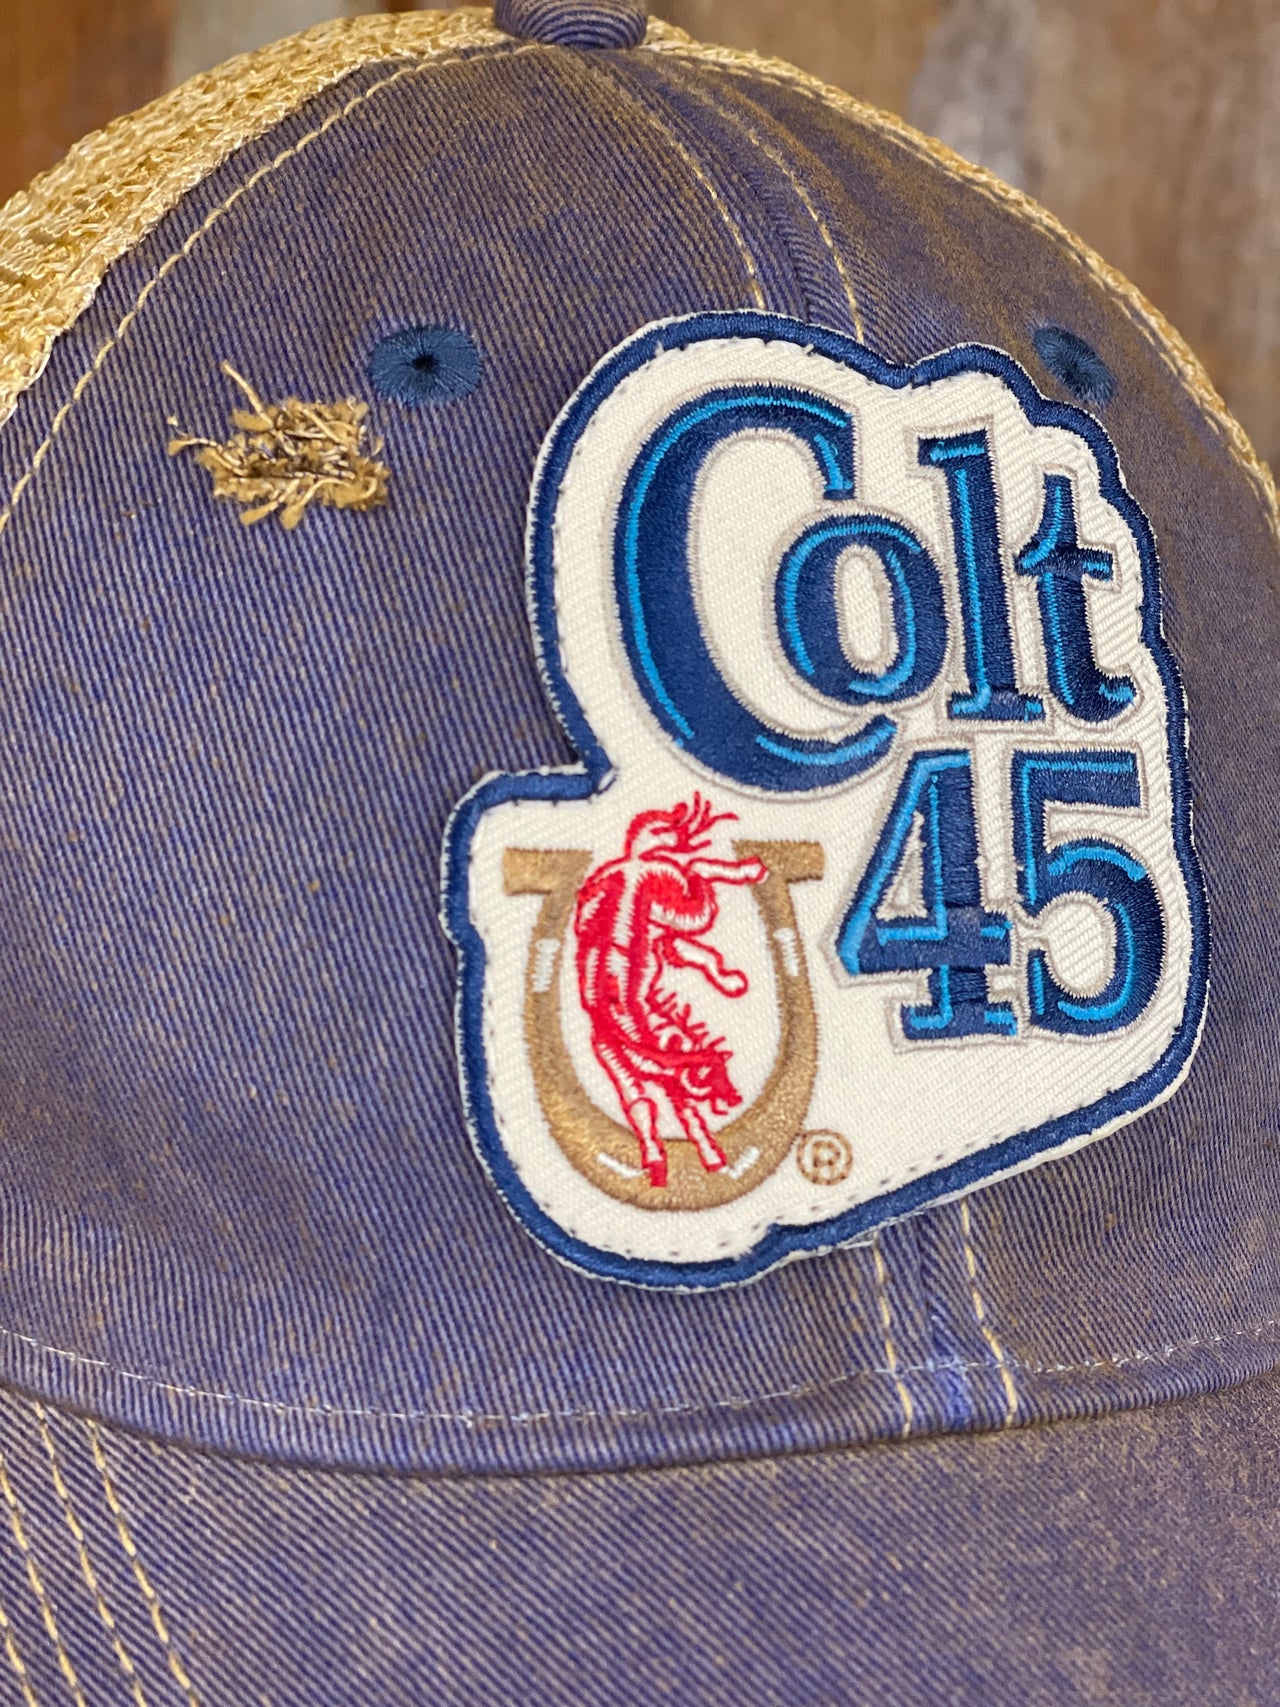 Retro Style Colt 45 Beer hats